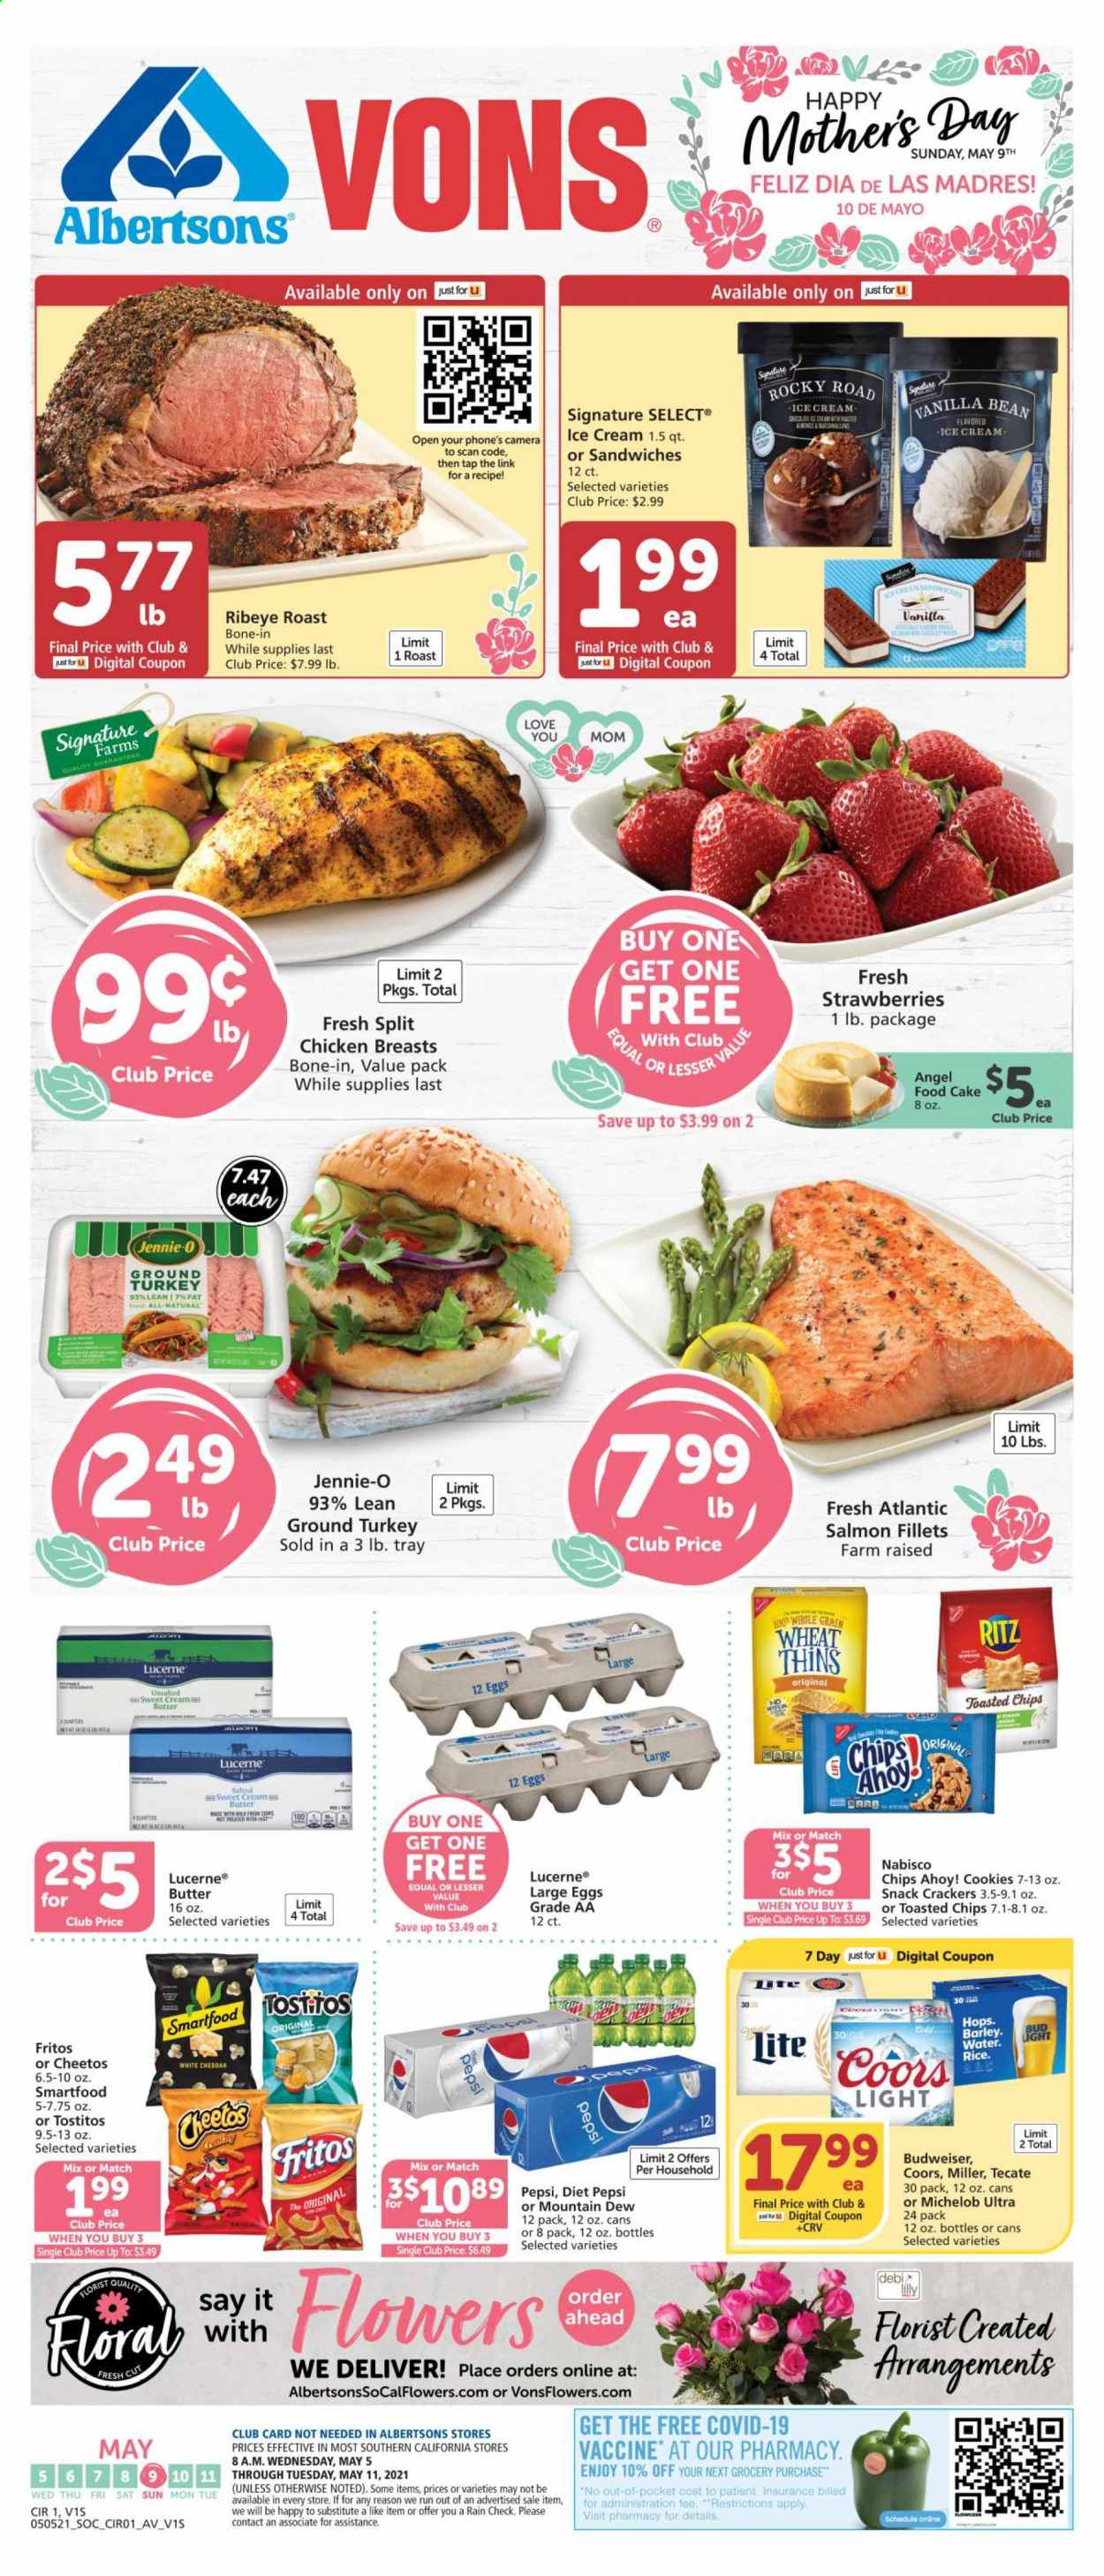 thumbnail - Vons Flyer - 05/05/2021 - 05/11/2021 - Sales products - cake, Angel Food, onion, strawberries, ground turkey, chicken breasts, salmon, salmon fillet, sandwich, large eggs, butter, ice cream, cookies, snack, crackers, Chips Ahoy!, RITZ, Fritos, Cheetos, chips, Smartfood, Thins, Tostitos, Mountain Dew, Pepsi, Diet Pepsi, beer, Budweiser, Coors, Michelob, Bud Light, Miller, tray. Page 1.